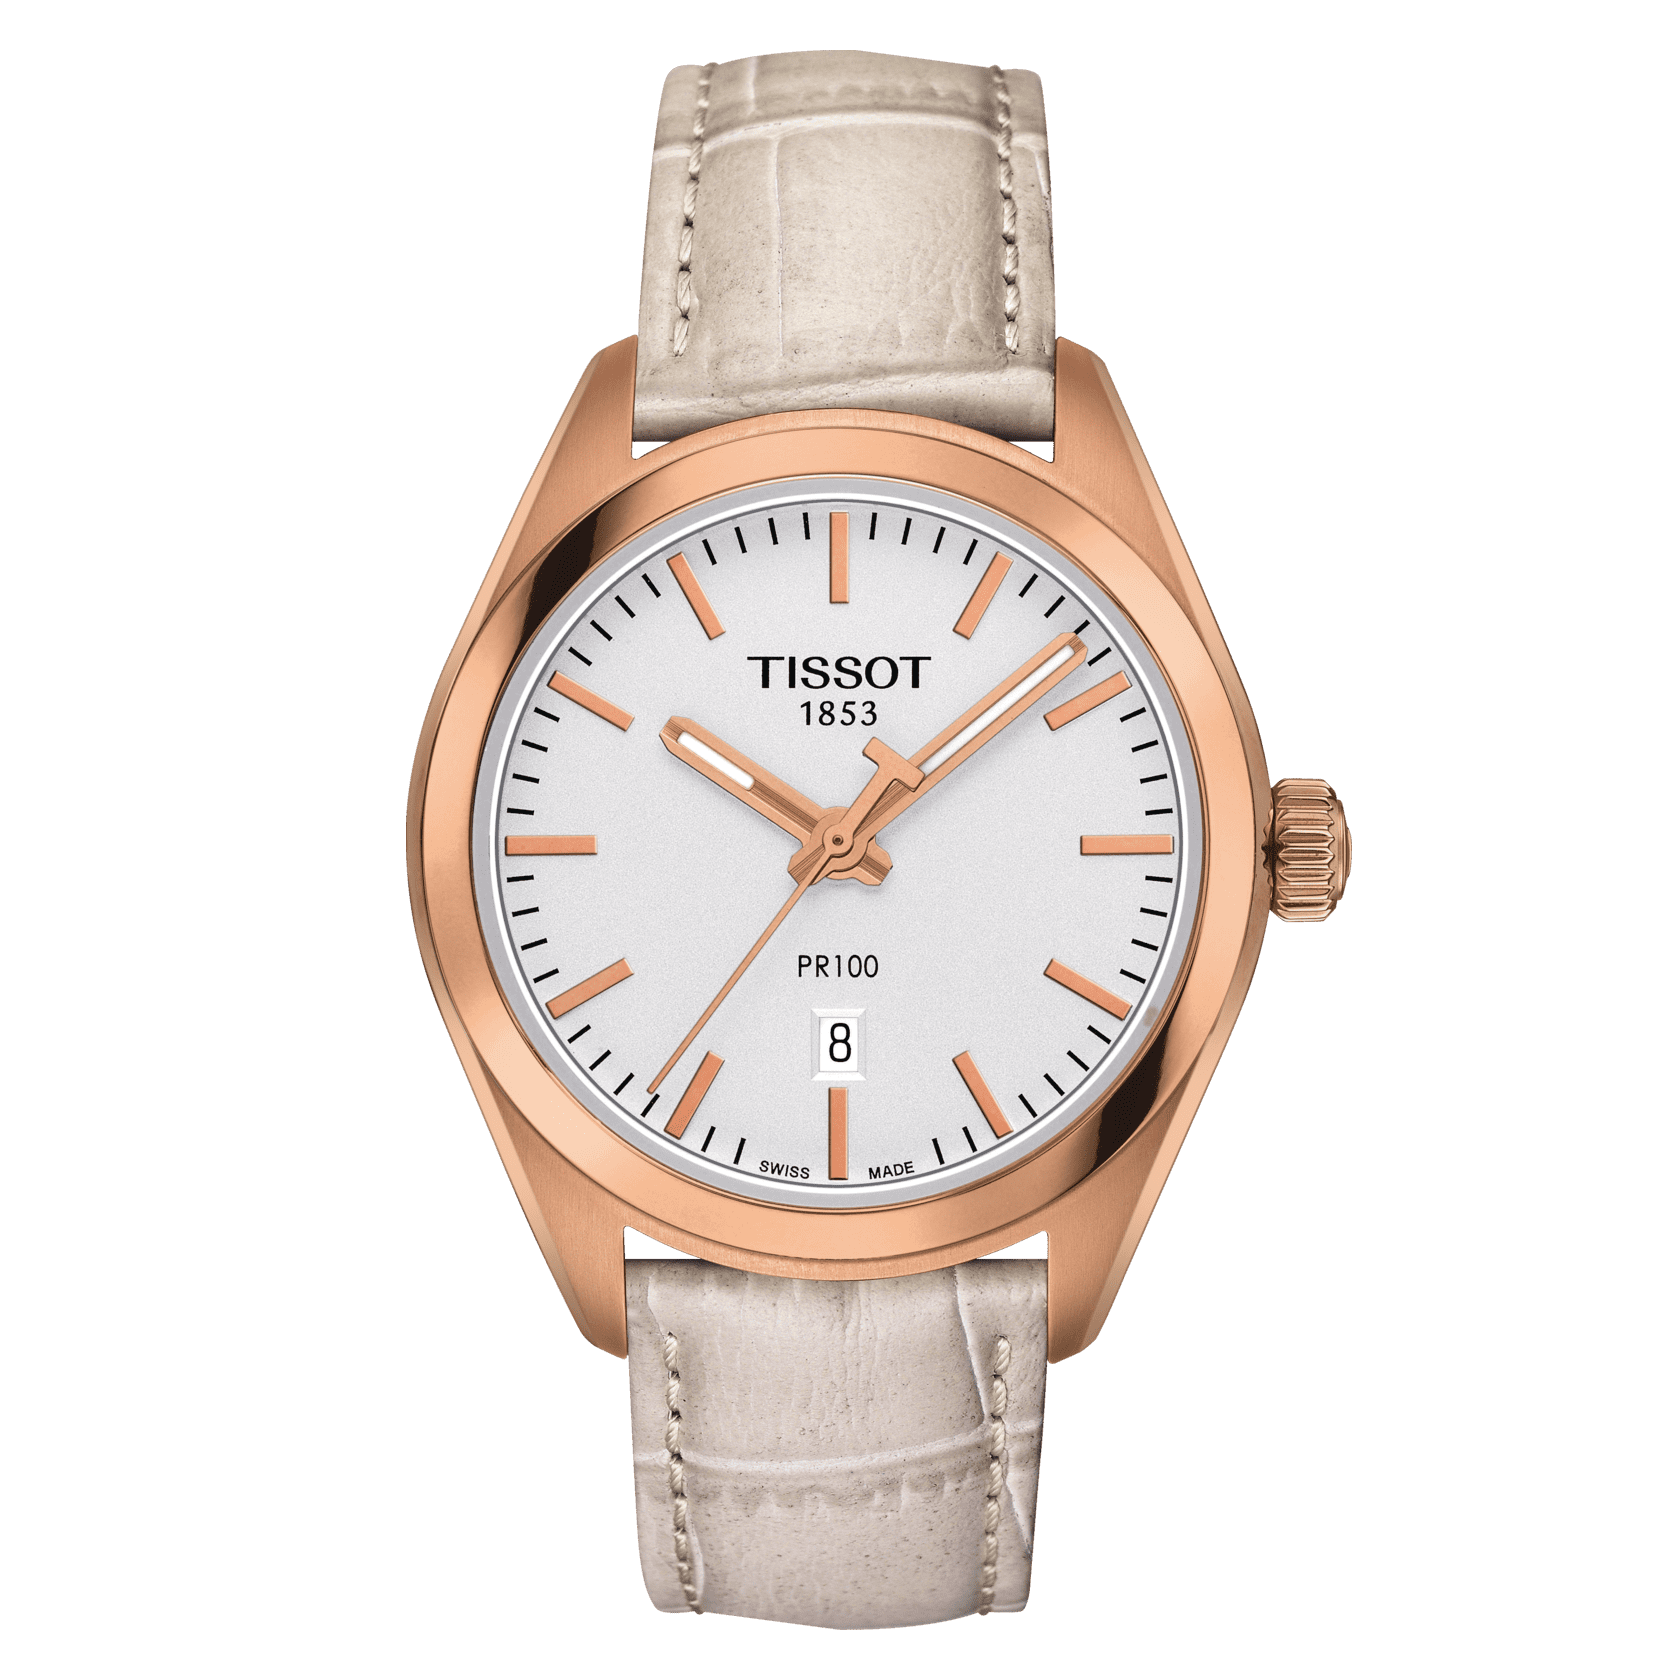 TISSOT PR 100 QUARTZ (T101.210.36.031.00)
T-Classic Collection
Water-resistant up to a pressure of 10 bar (100 m / 330 ft)
316L stainless steel case with rose gold PVD coating
Scratch-resistant sapphire crystal
33mm Case
Swiss quartz ETA F04.111 Mov